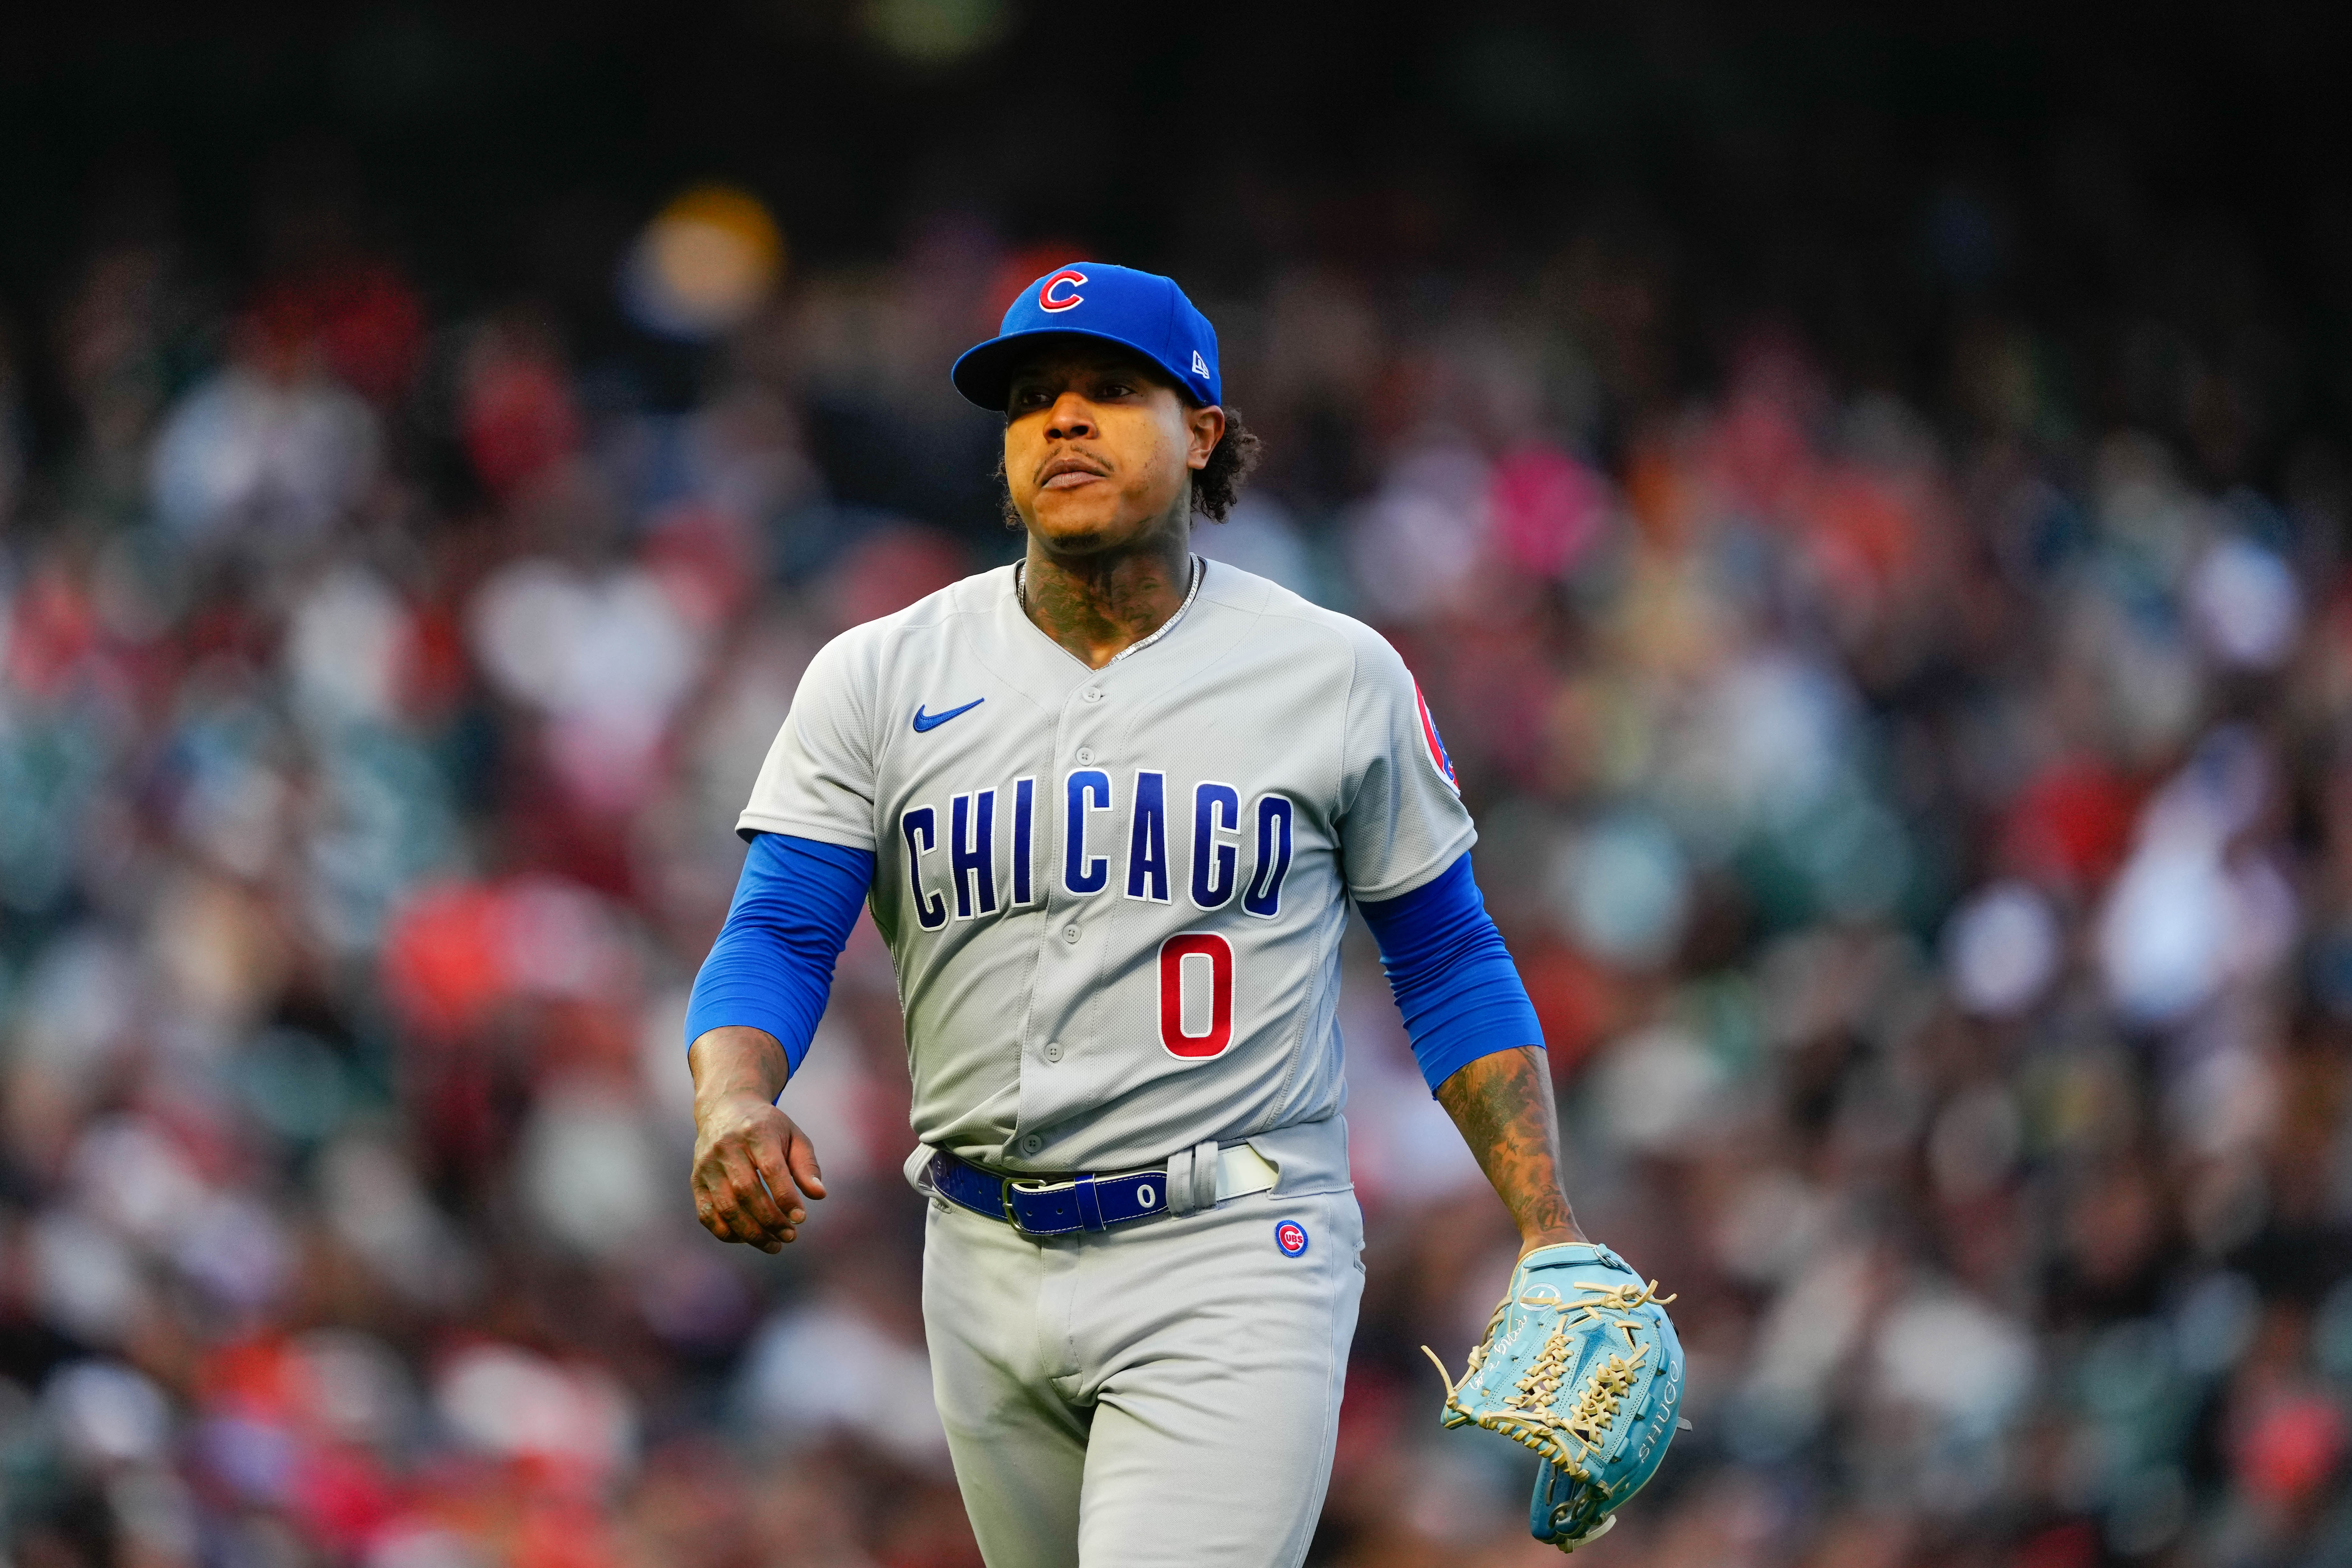 Cubs' Stroman stops fighting hip injury, goes on IL